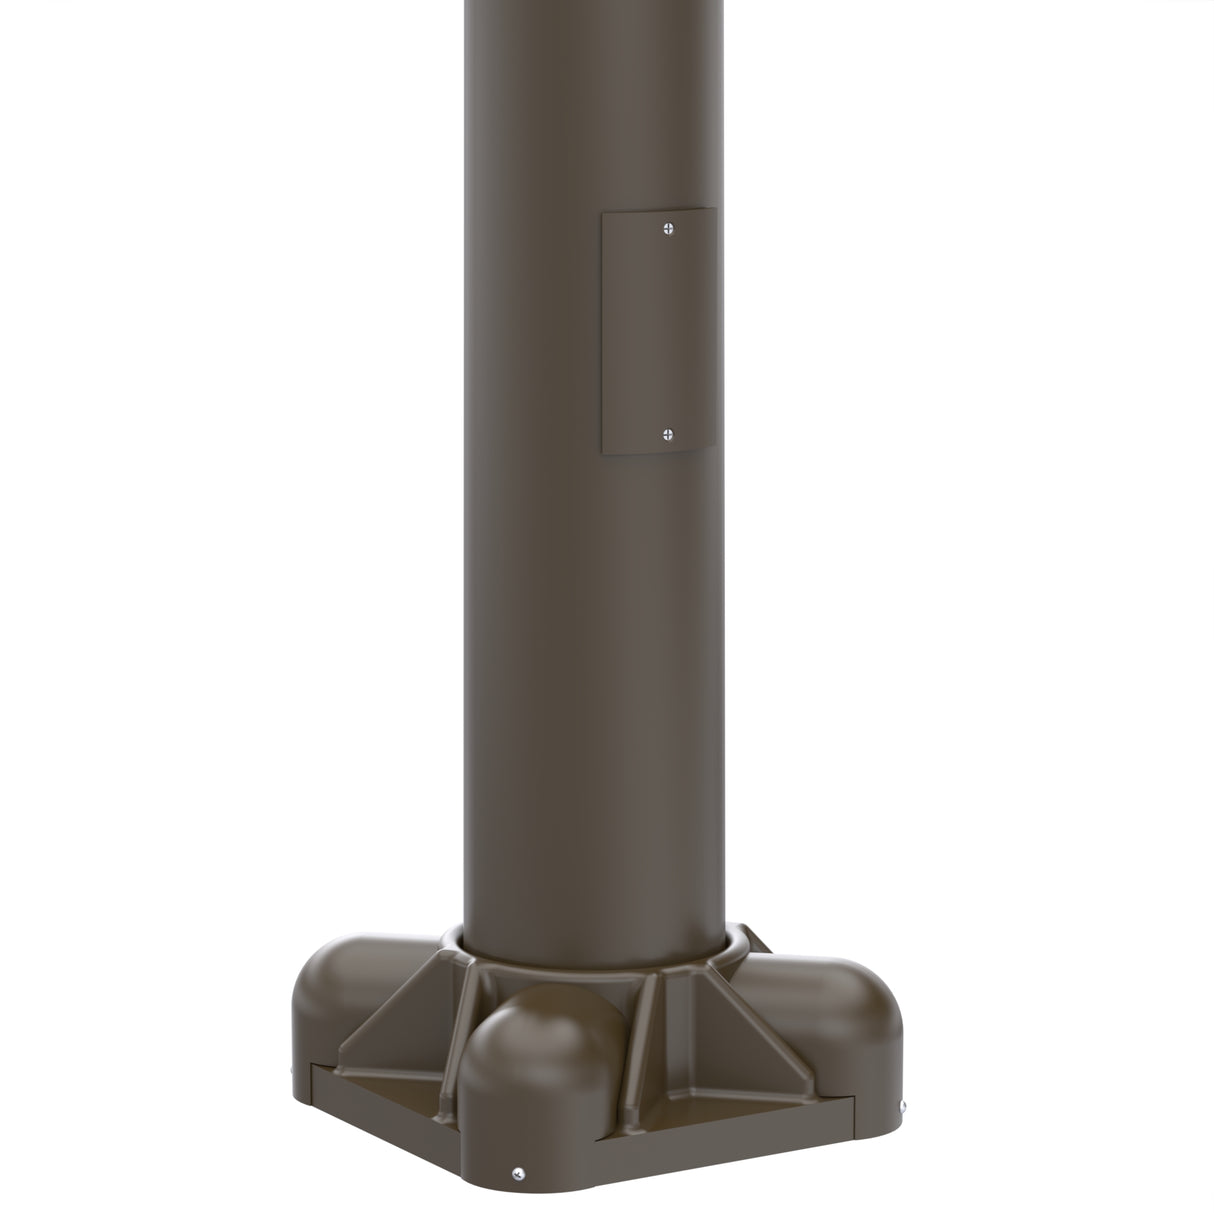 28' Tall x 8.0" Base OD x 4.5" Top OD x 0.250" Thick, Round Tapered Aluminum, Anchor Base Light Pole